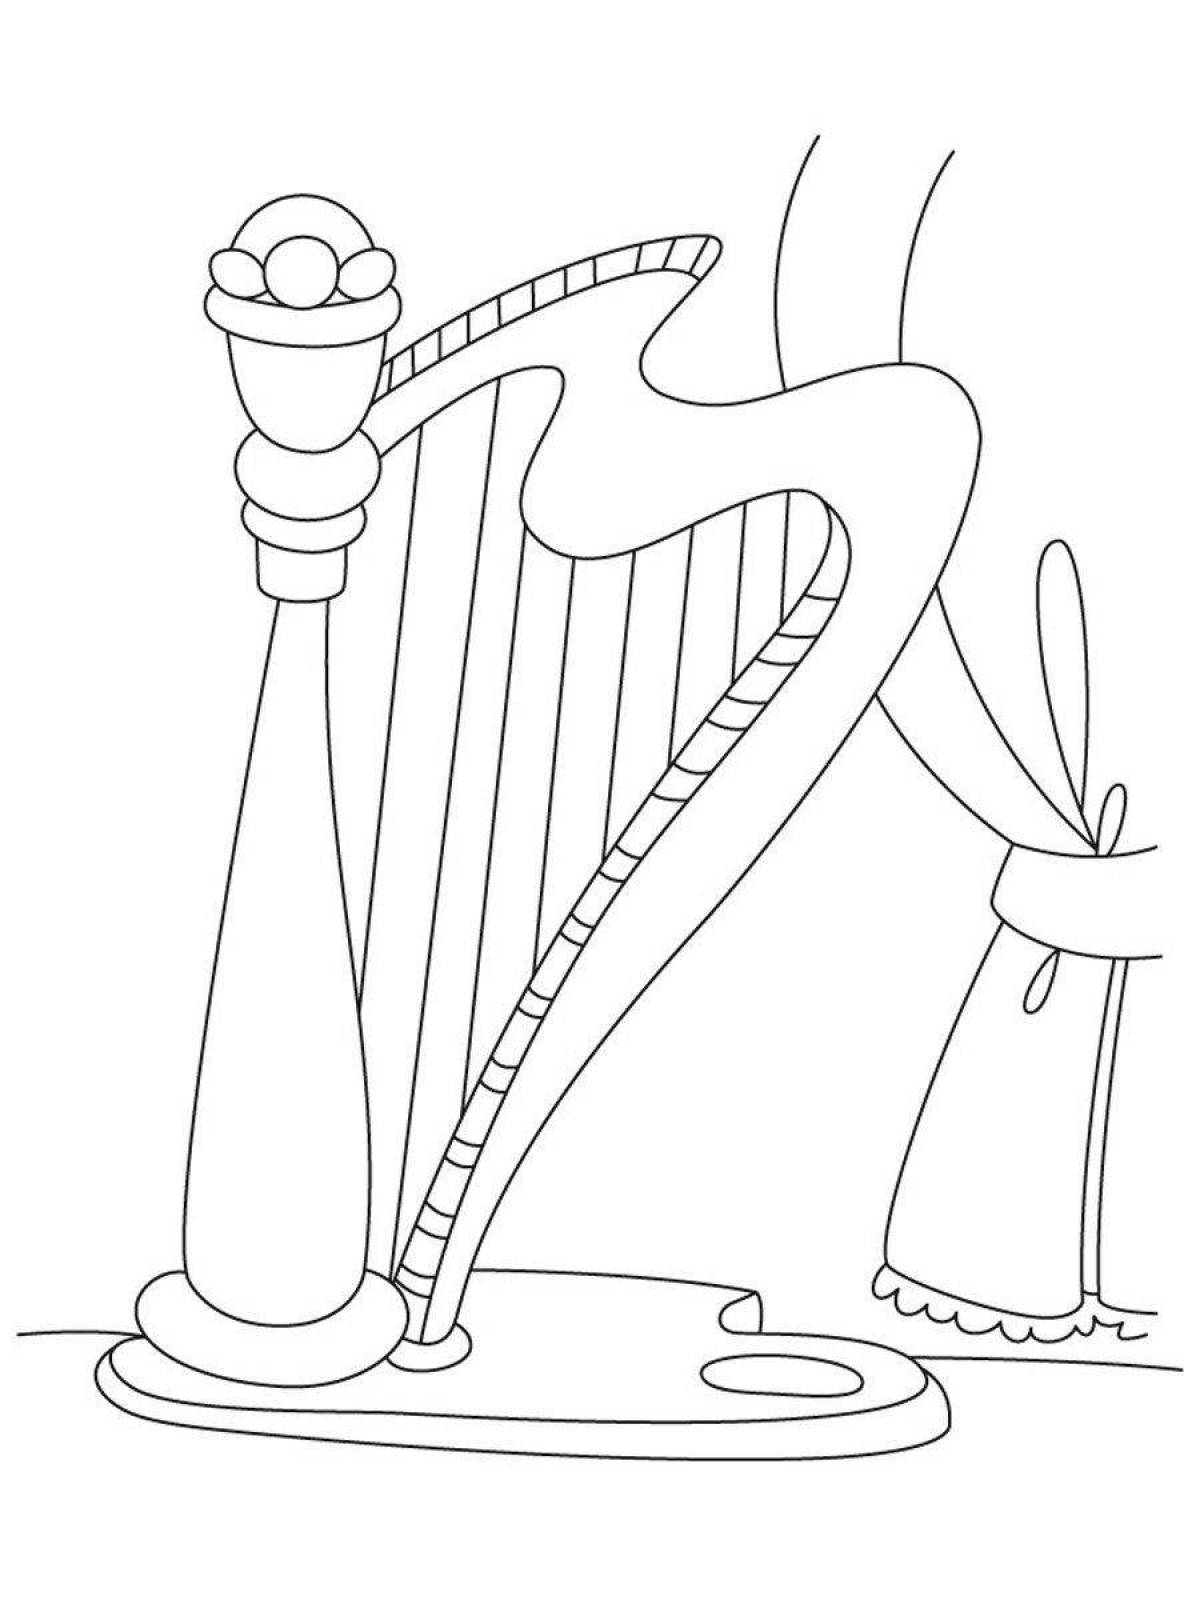 Awesome harp coloring book for kids